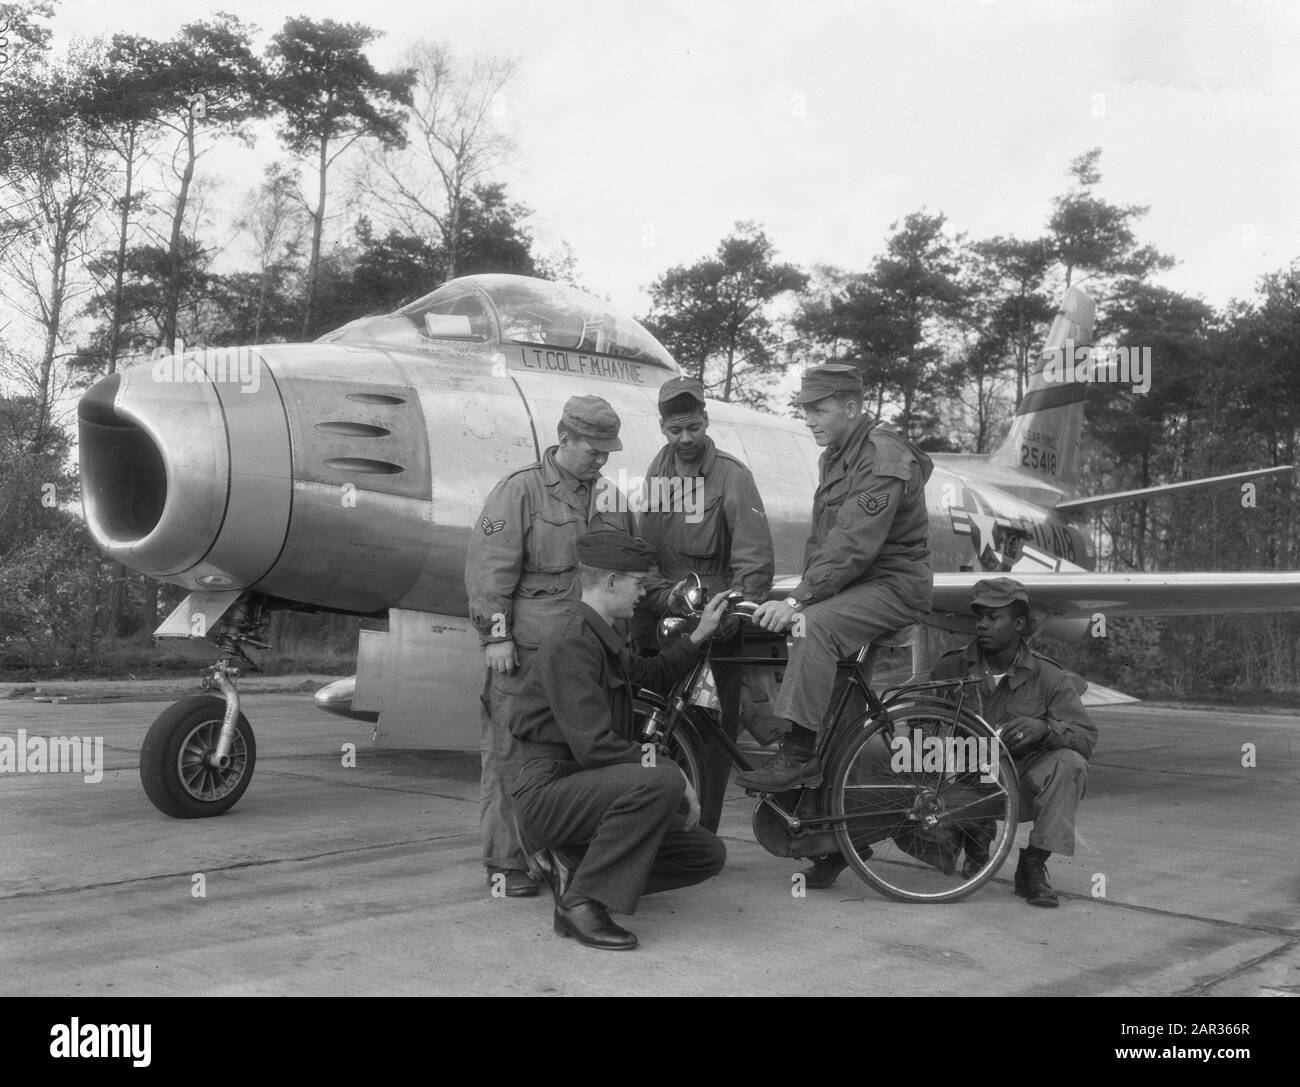 [North American F-86 Sabers of the USAFE 32 th Fighter Day Squadron staitioned at Soesterberg] Dutch Air Force Military with bicycle and Americans Data: 9 novembre 1954 luogo: Soesterberg, Utrecht Parole Chiave: Crew, JAYS, Branches Foto Stock